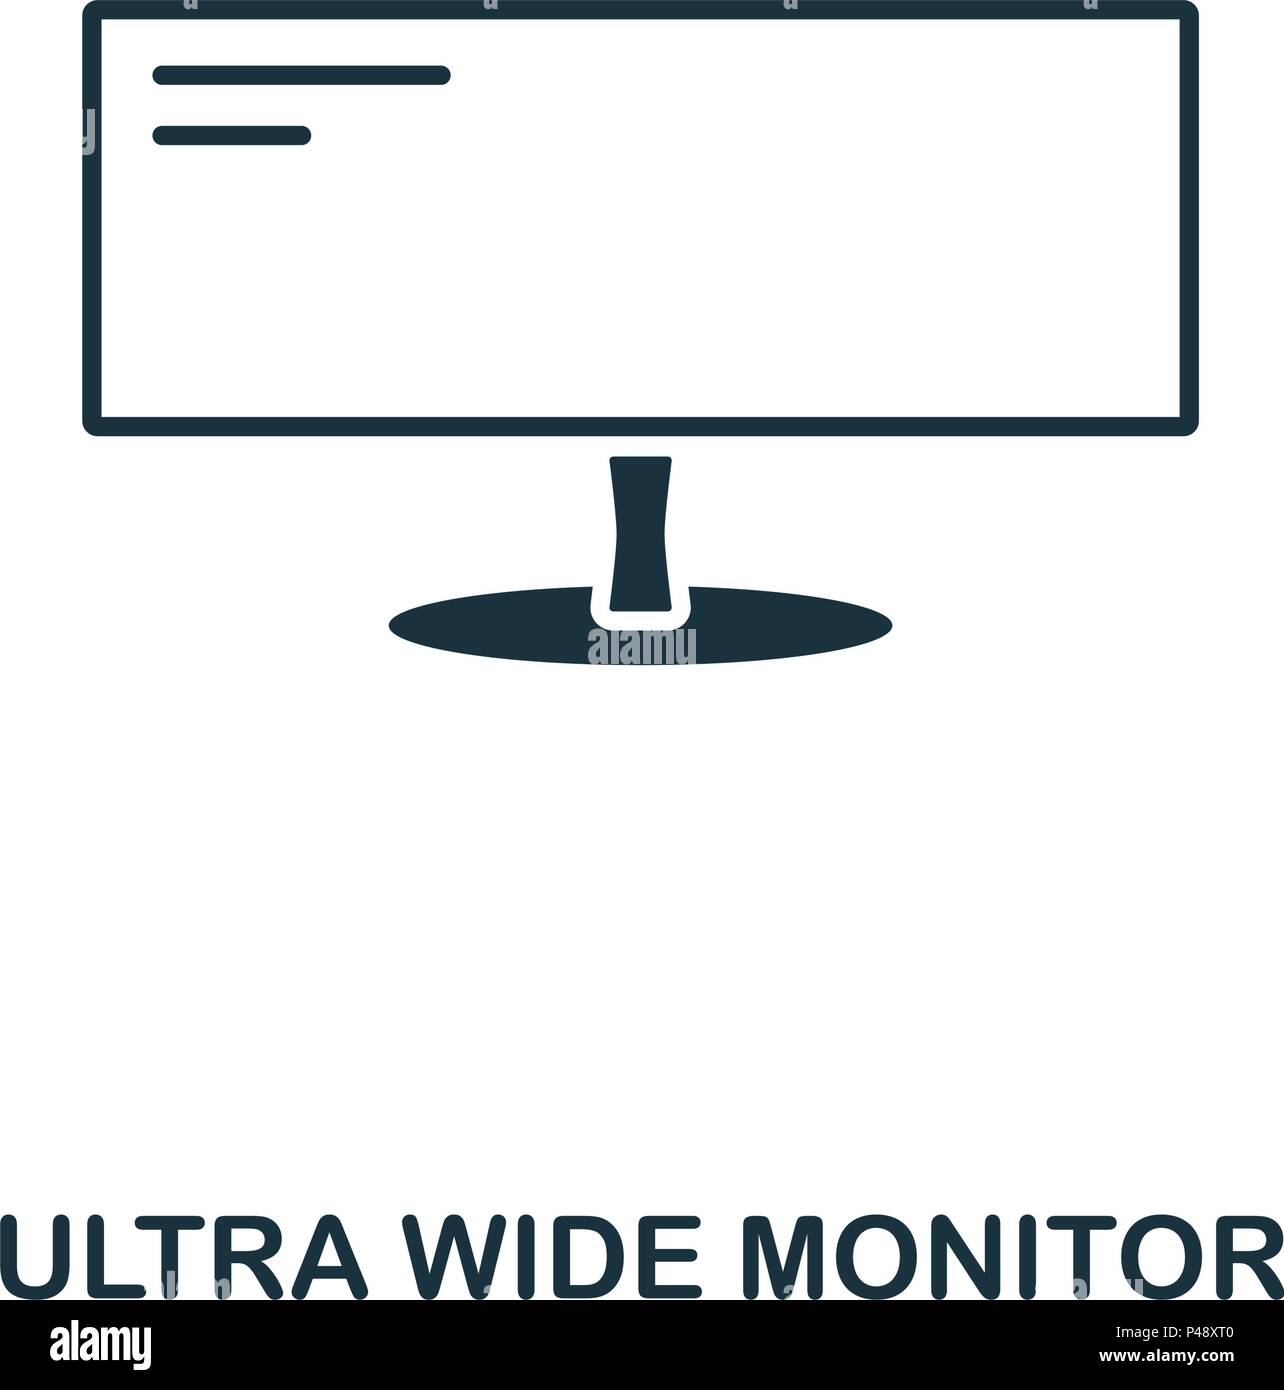 Ultra Wide Monitor icon. Line style icon design. UI. Illustration of ultra wide monitor icon. Pictogram isolated on white. Ready to use in web design, apps, software, print. Stock Vector